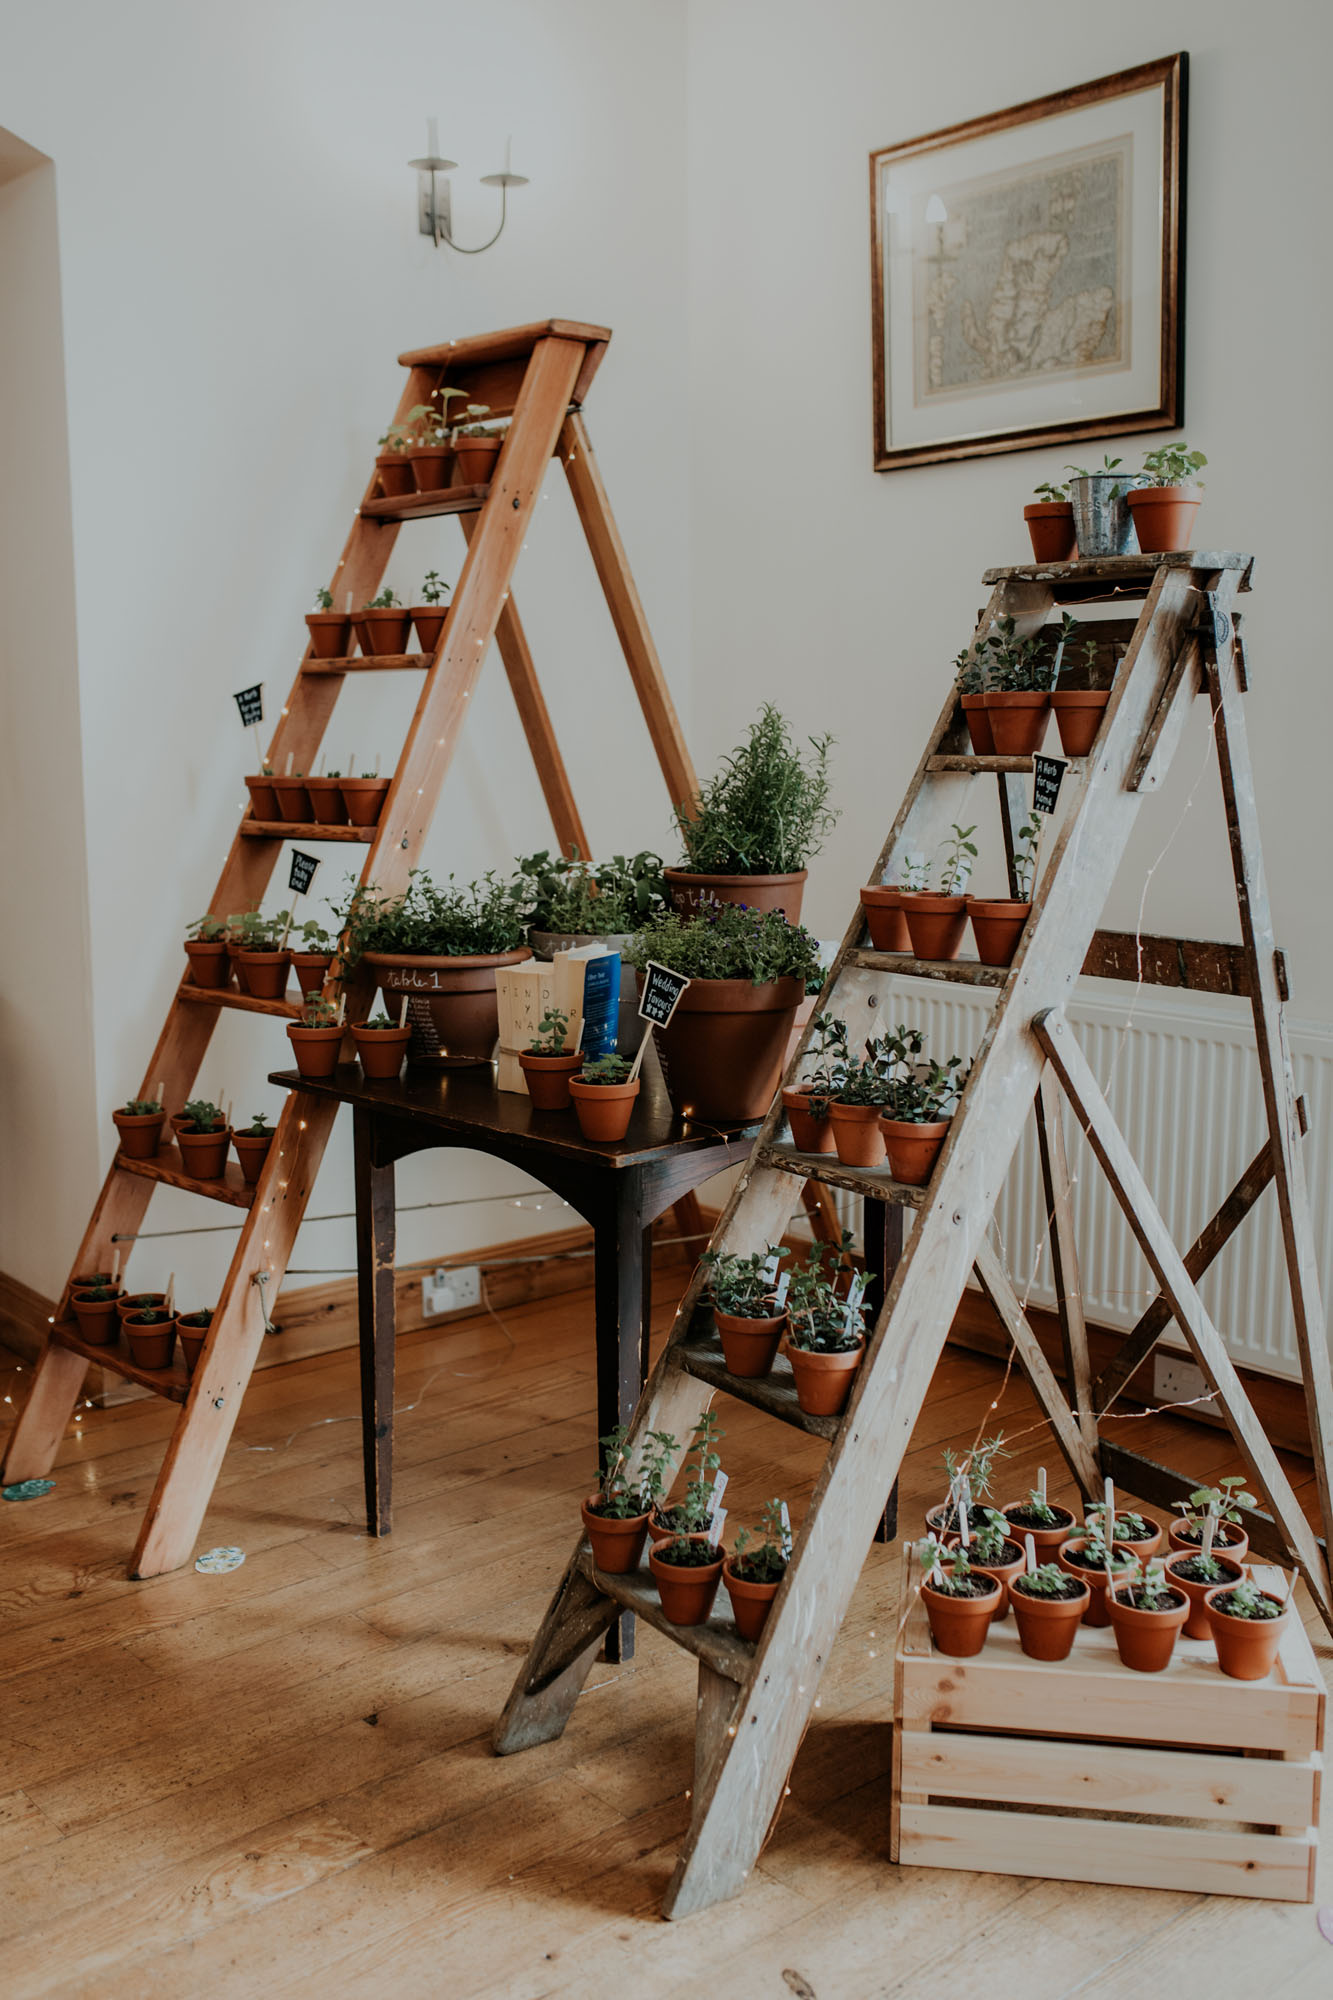 Step ladders with potted herb wedding favours